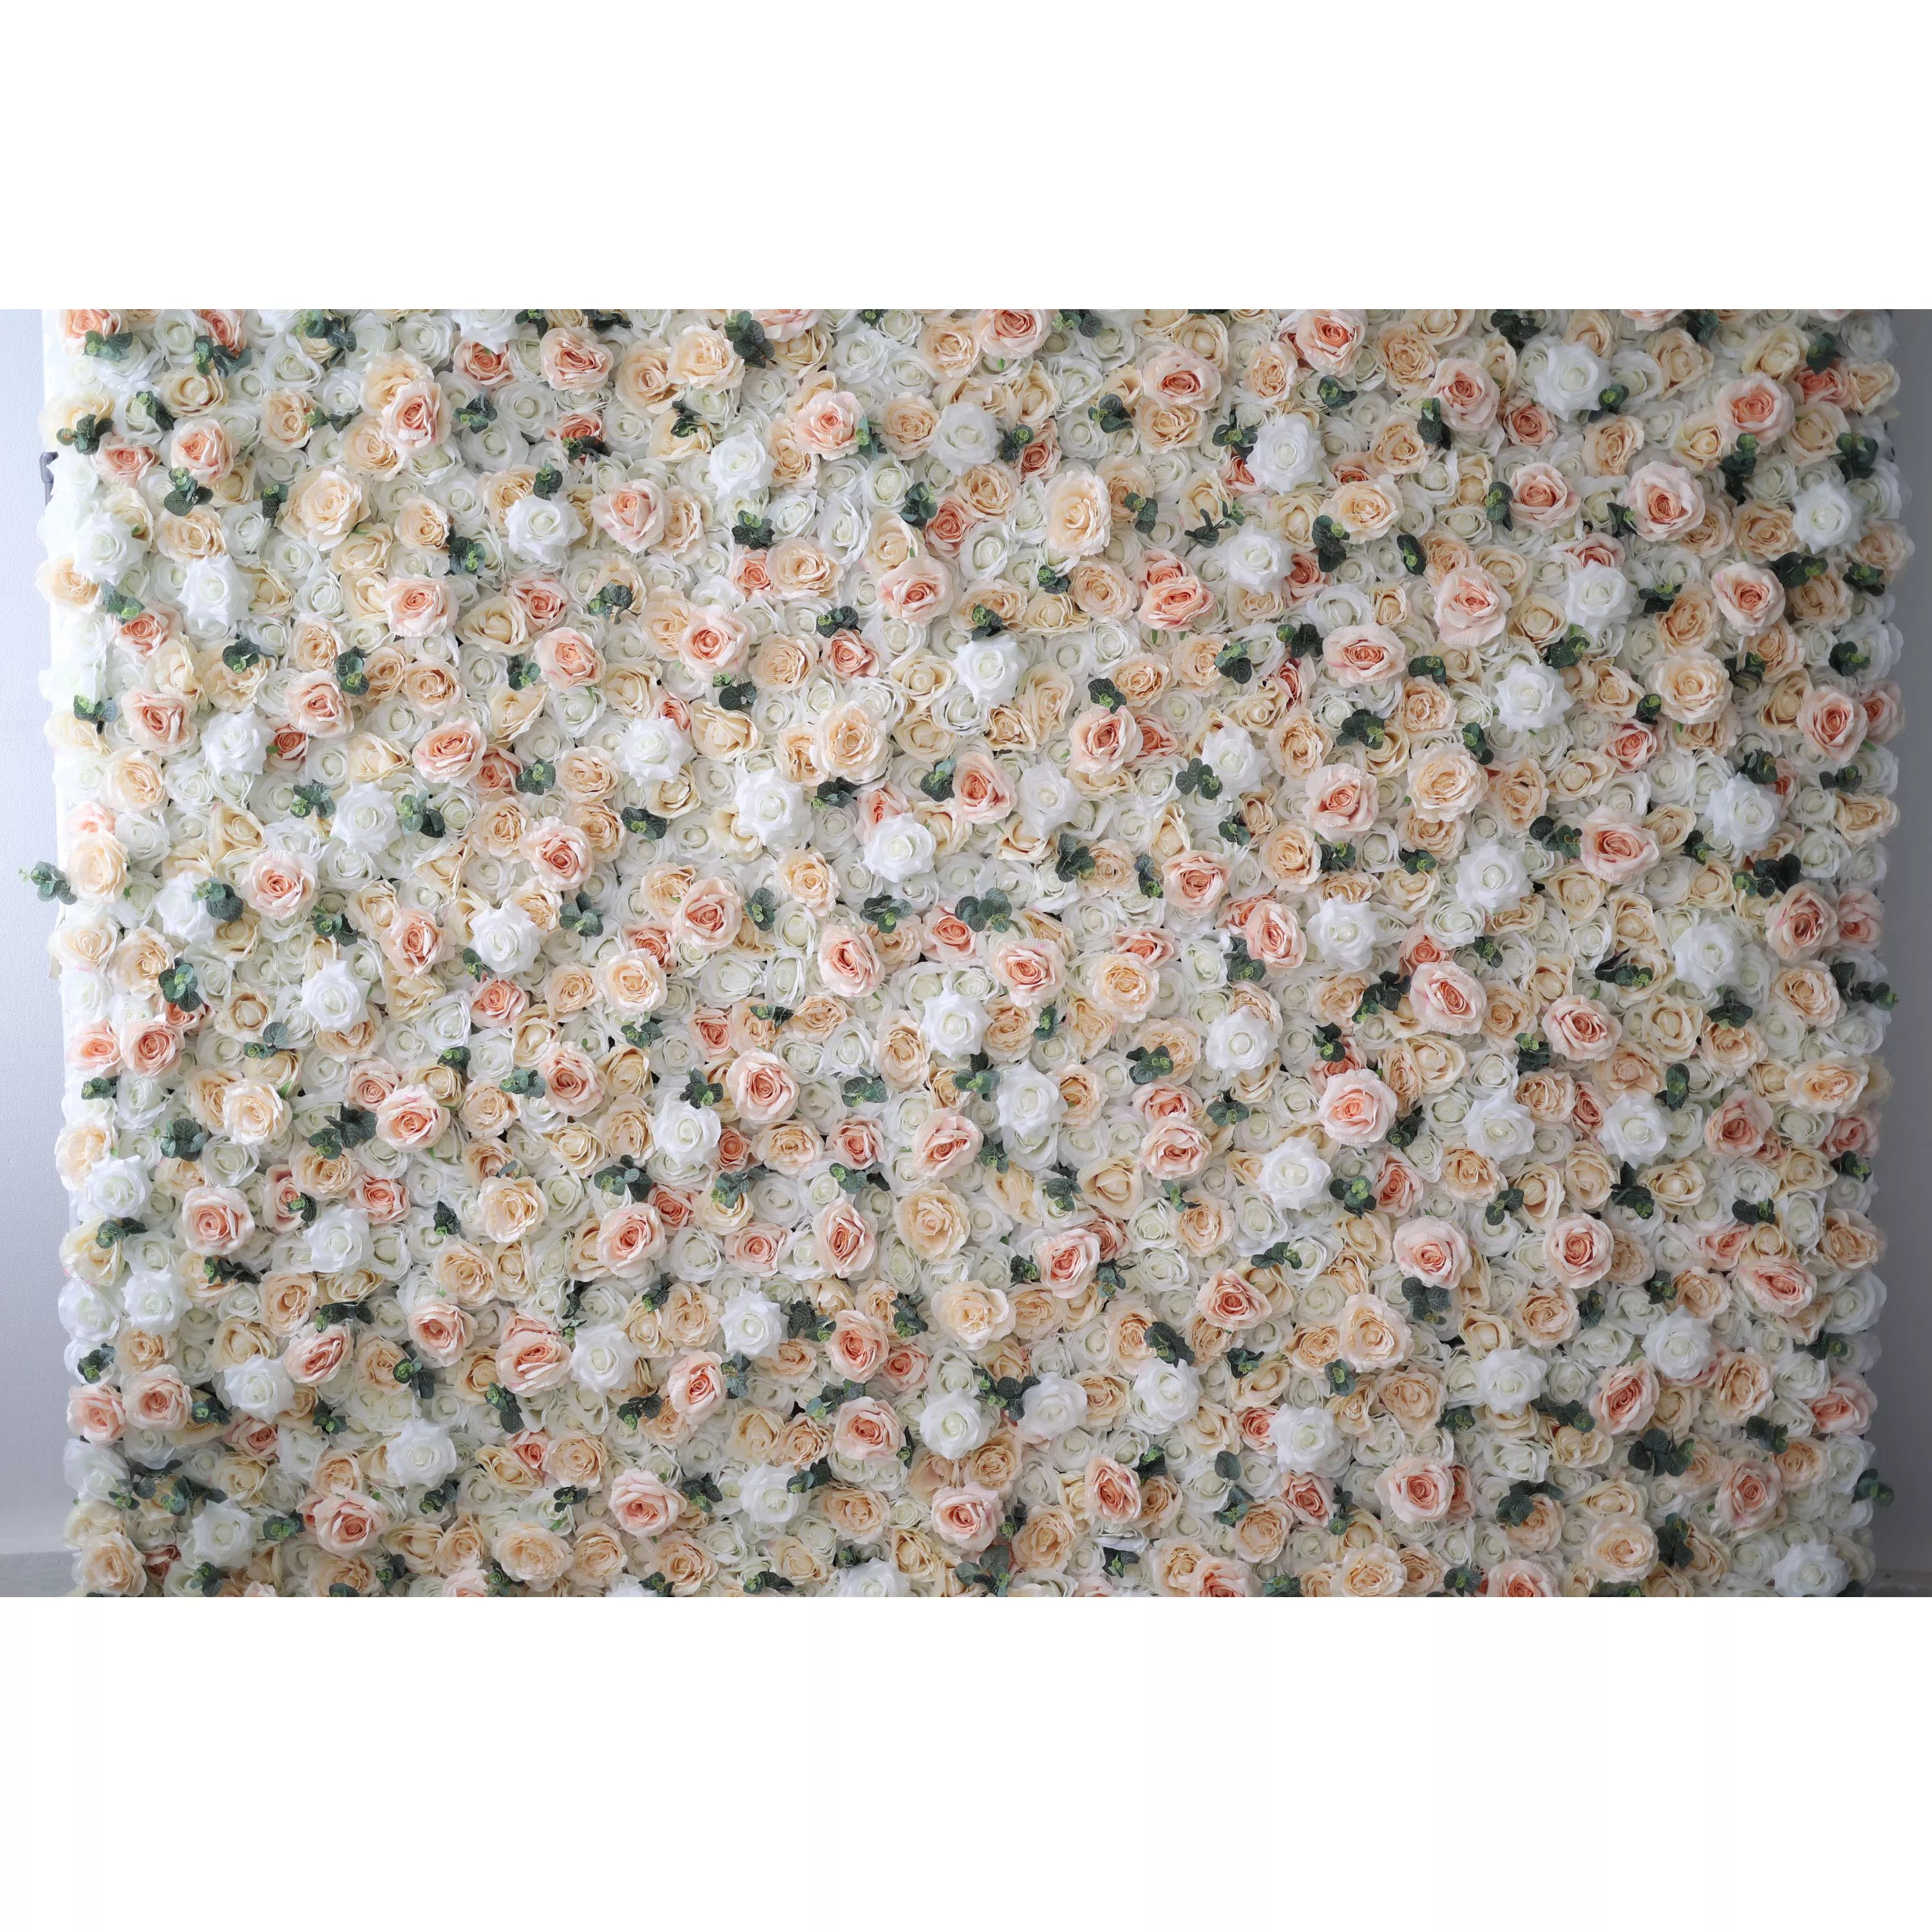 Valar Flowers artificial white and rose fog flower wall backdrop made of fabric for wedding and event decor, perfect for photography3